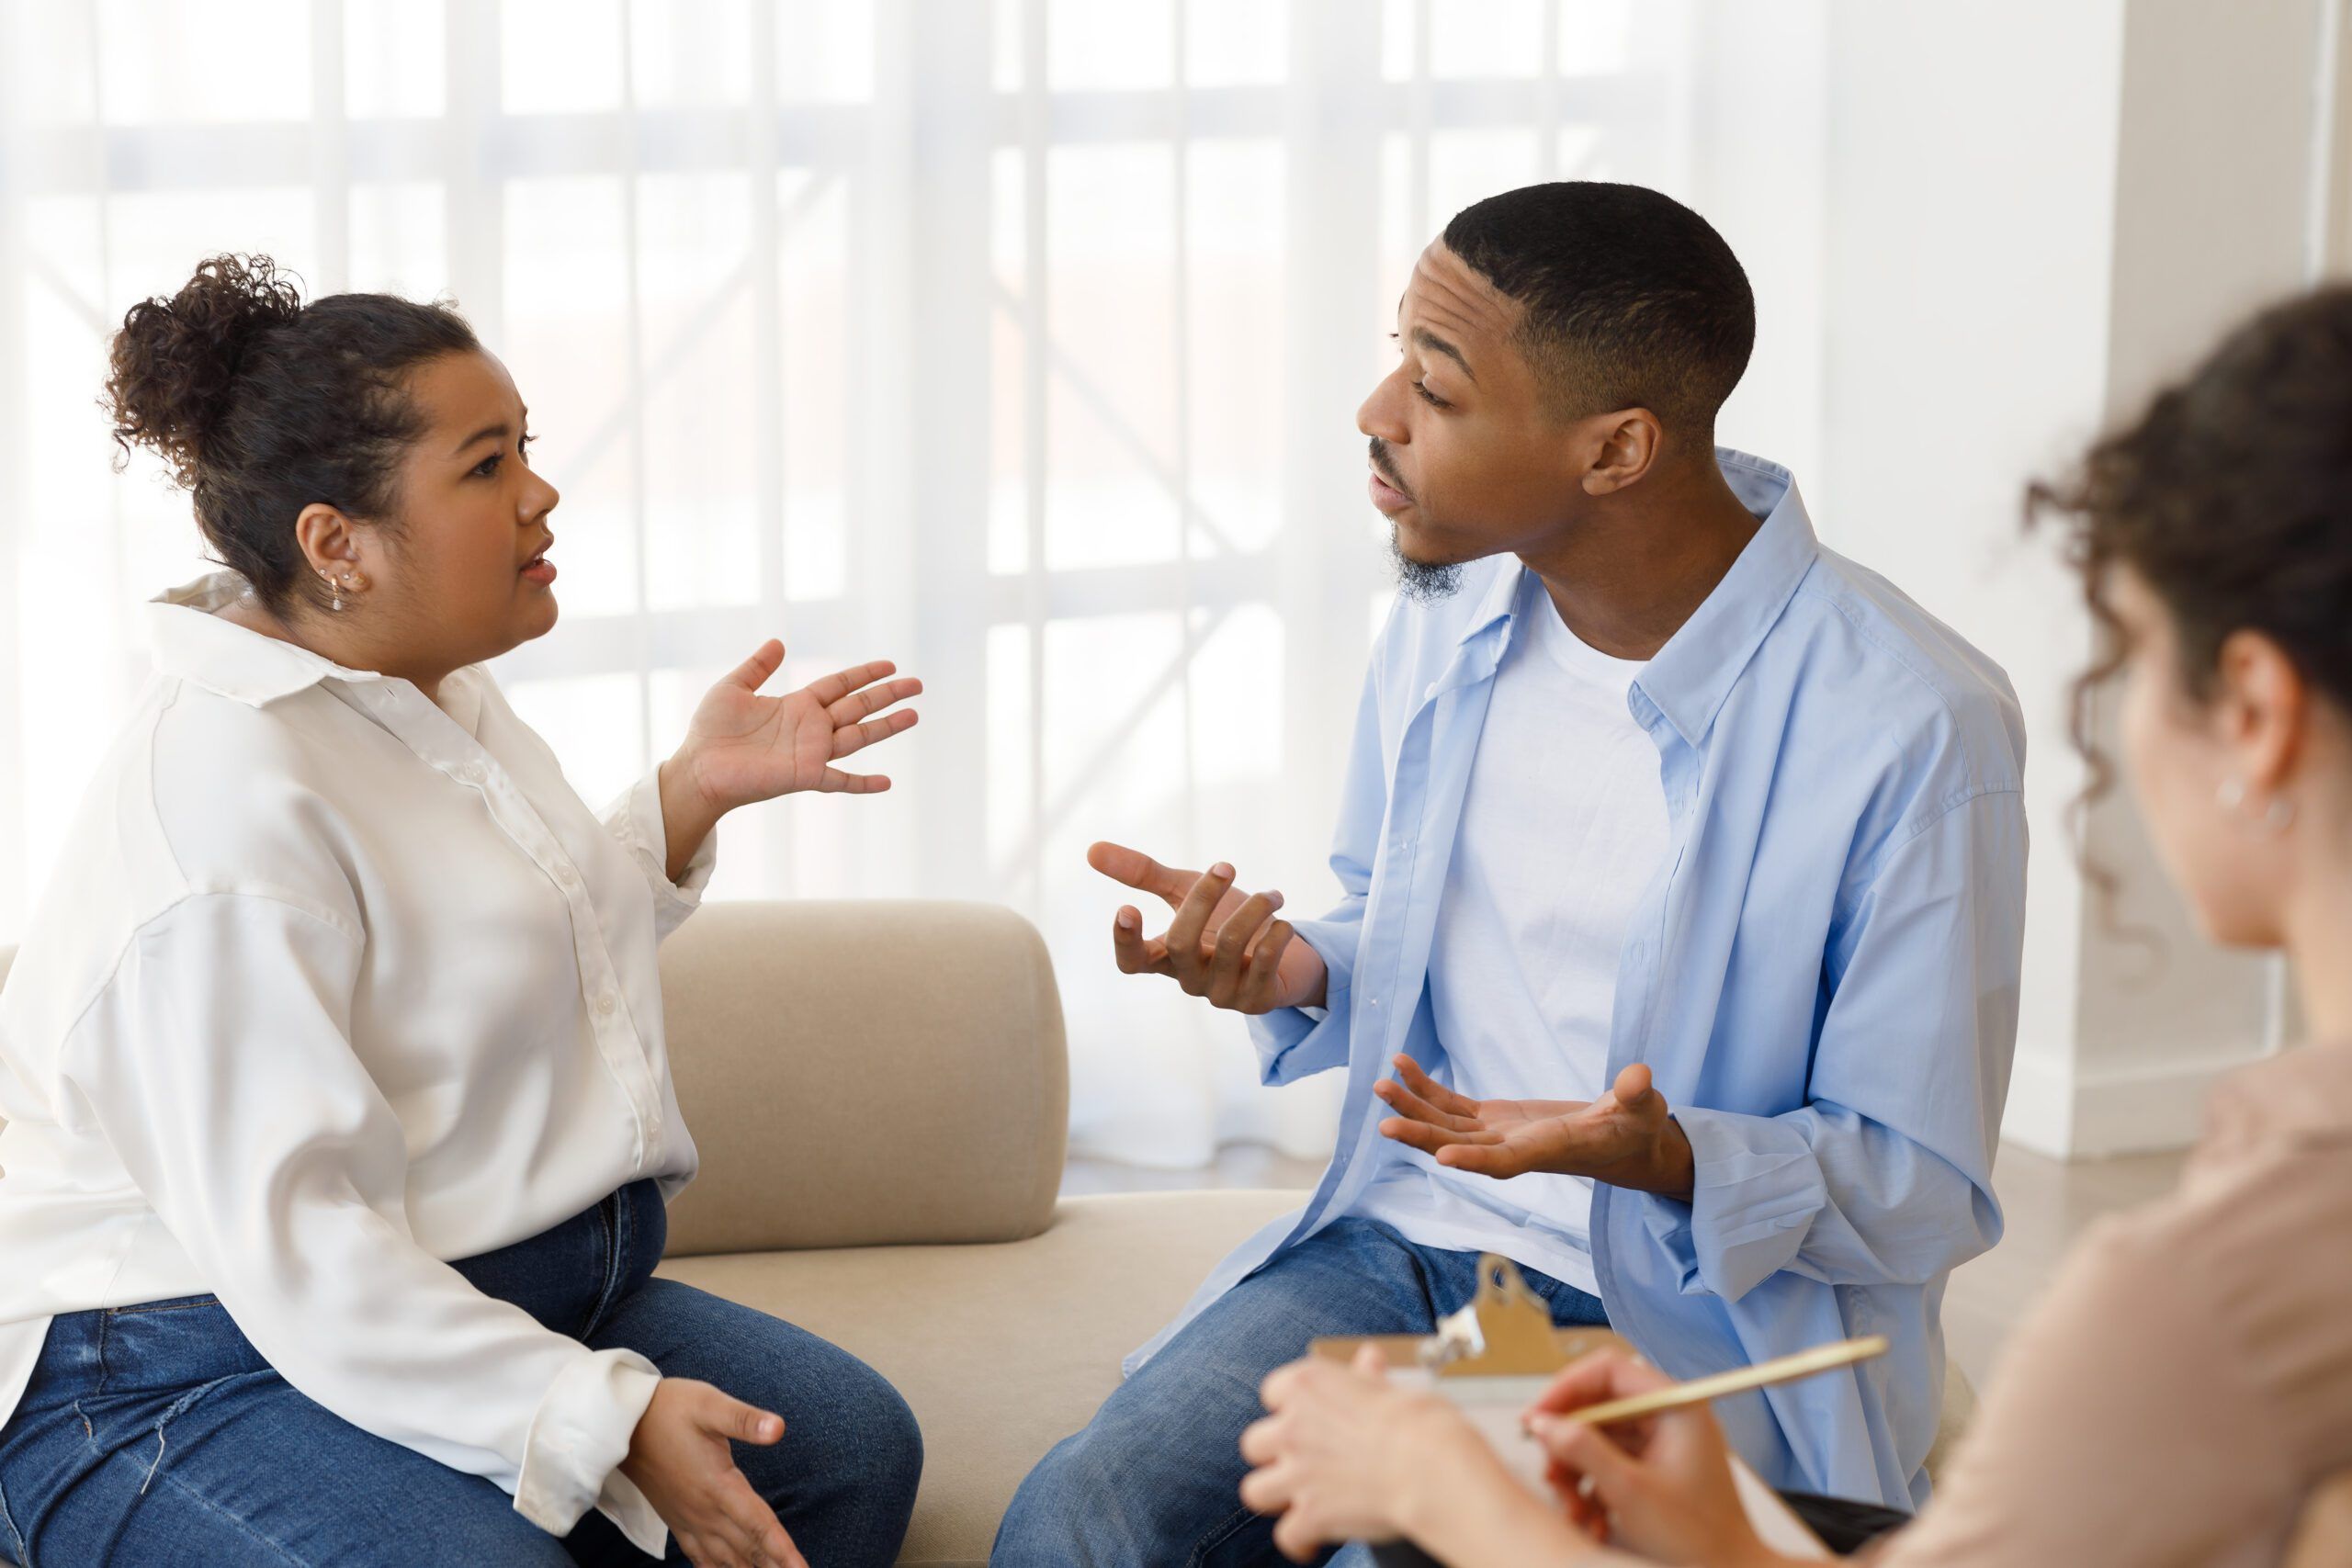 Hysterical emotional young black man and hispanic chubby woman yelling and gesturing, mixed race spouses fight at family counselor office. Marital crisis, marriage counseling concept